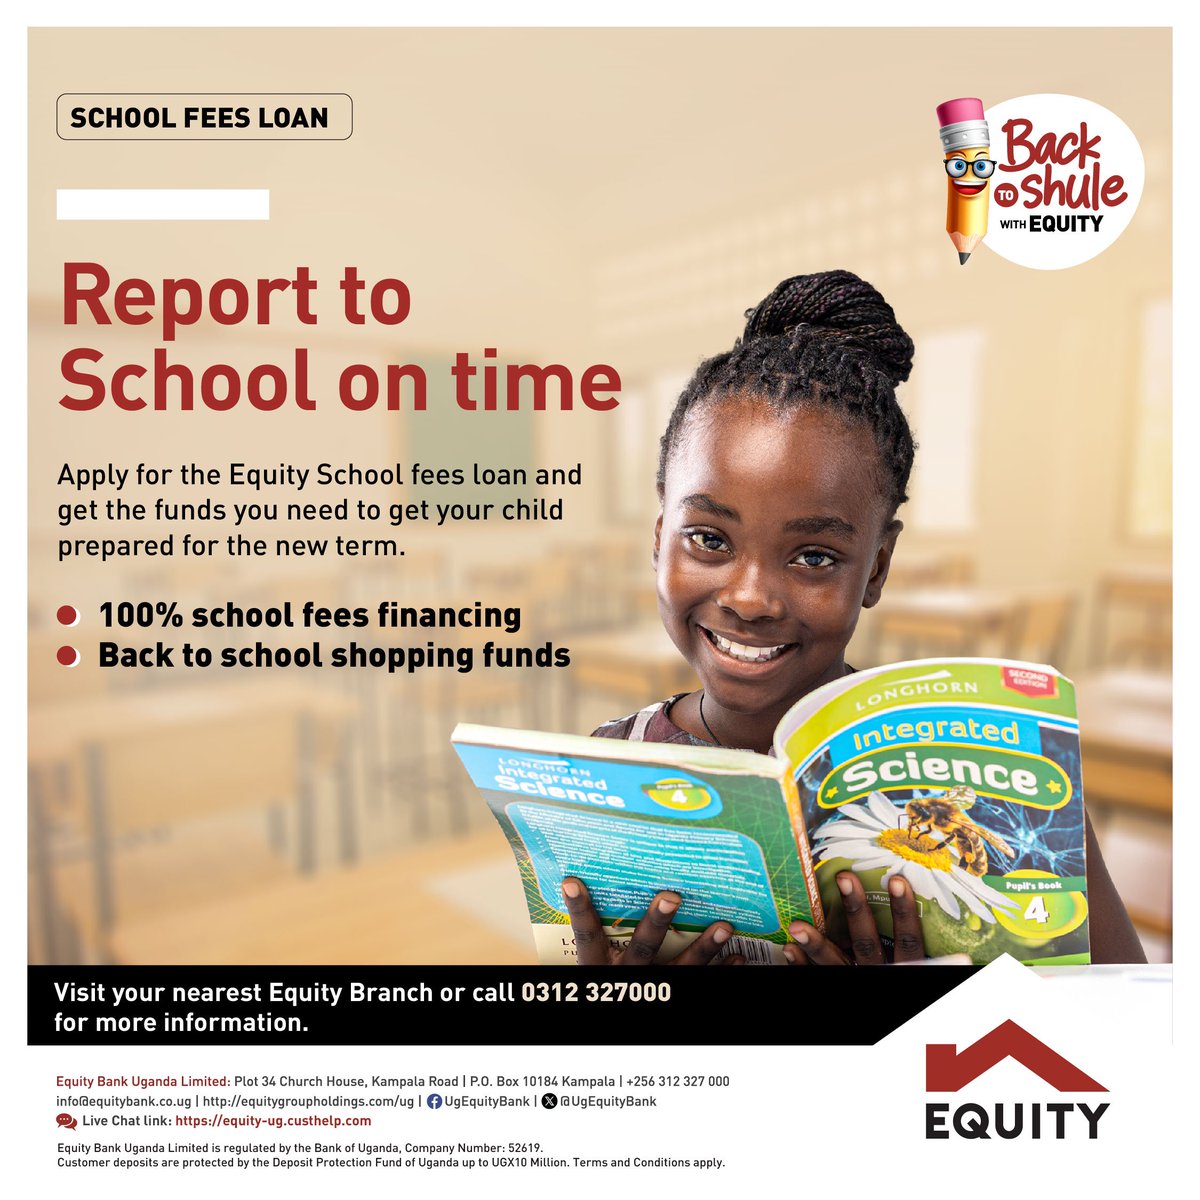 .AD: Report to school on time. Whether it's money for school fees or back to school shopping, access the funds you need for the new term with @UgEquityBank school fees loan. #ChimpReportsNews #BackToShuleWithEquity